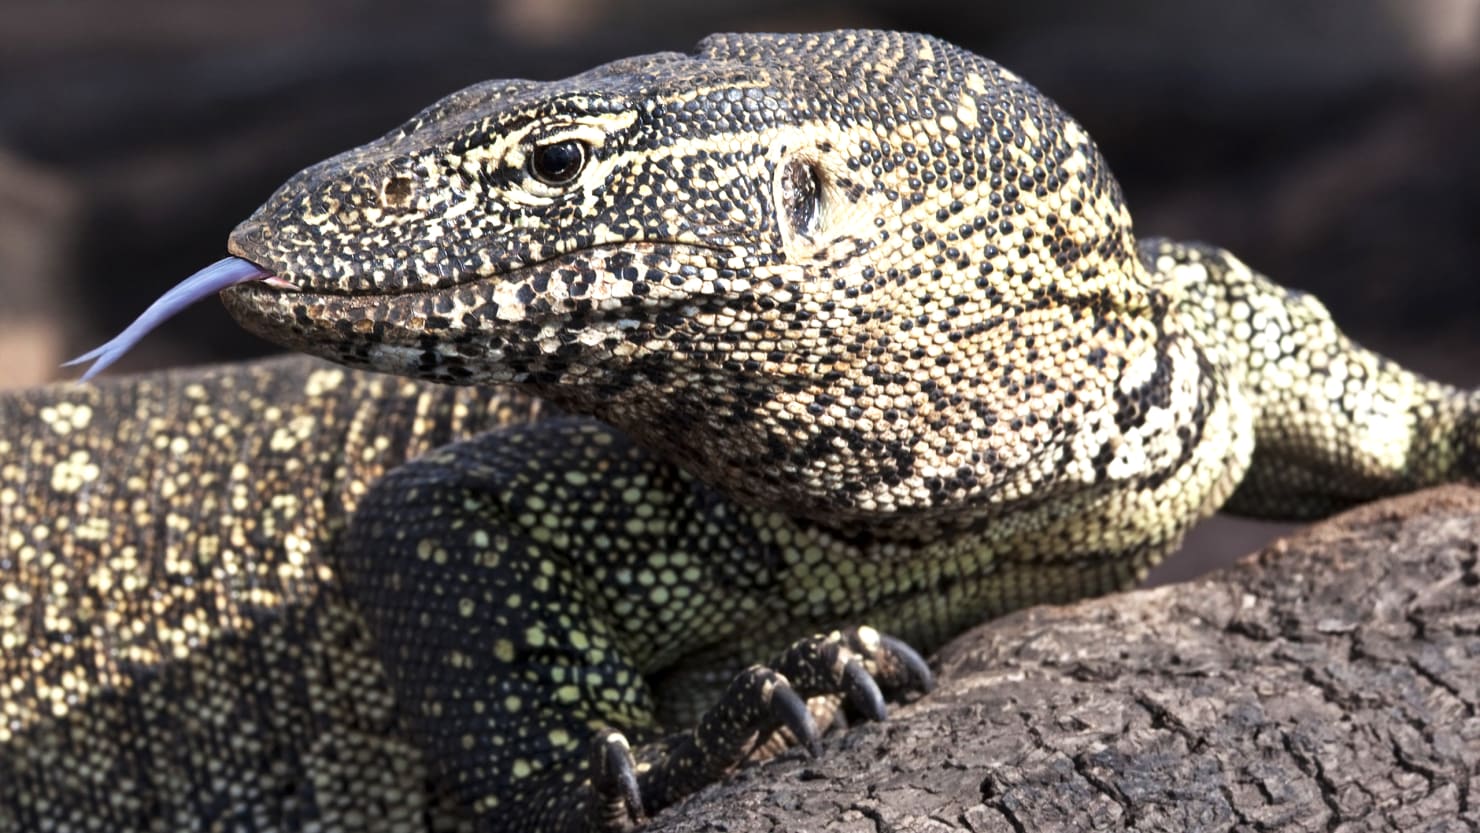 A SixFoot Lizard Is Terrorizing a Florida Family. Trappers Can’t Catch